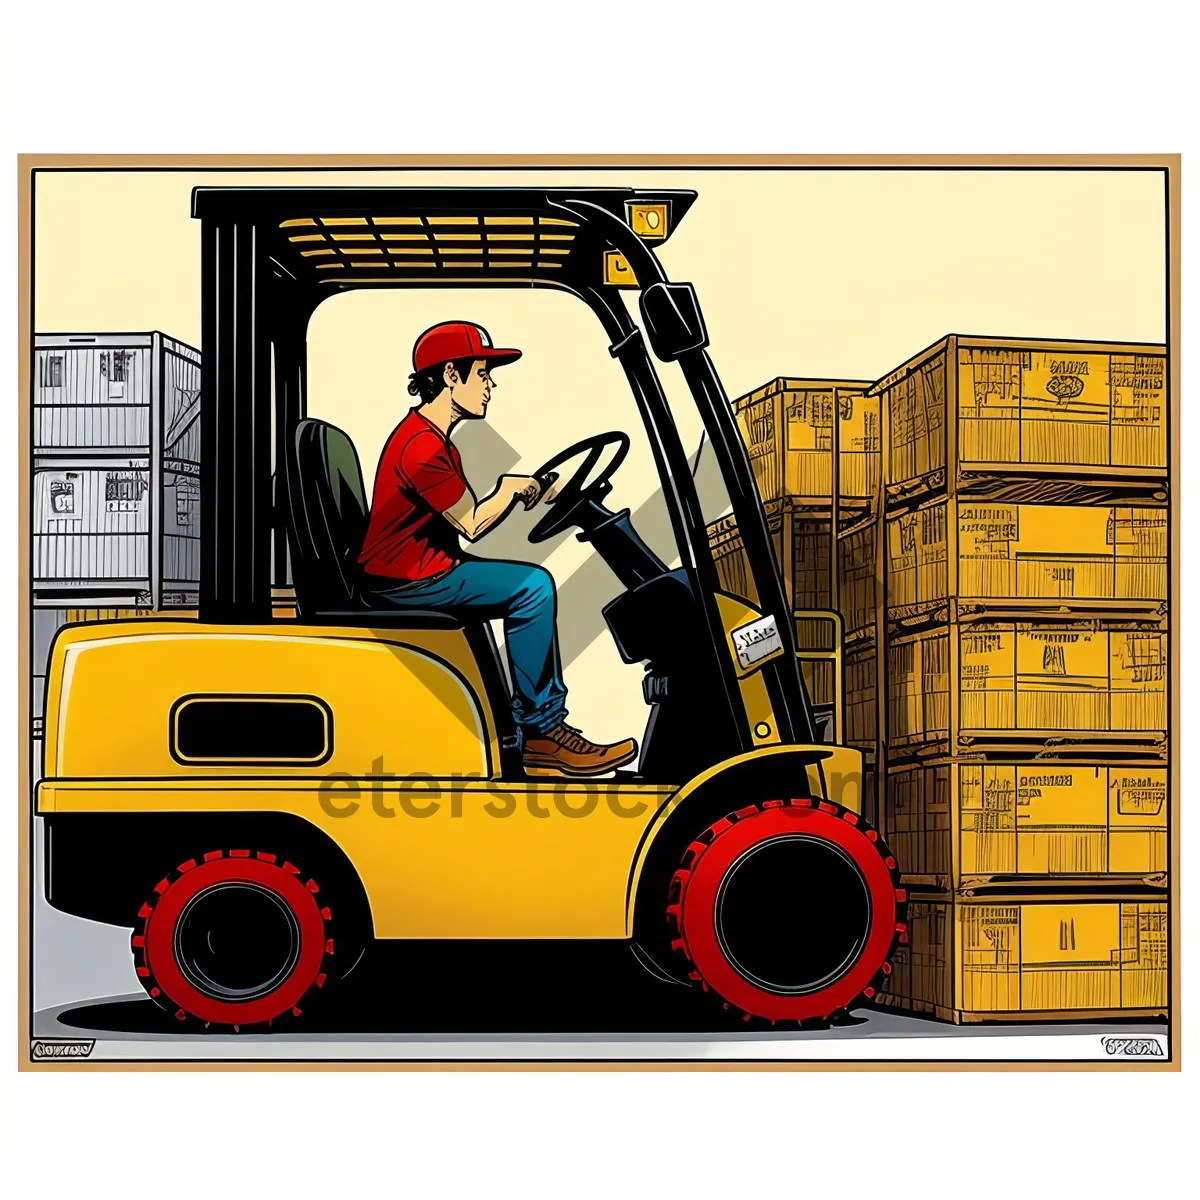 Picture of Heavy-duty Forklift Truck for Industrial Transportation